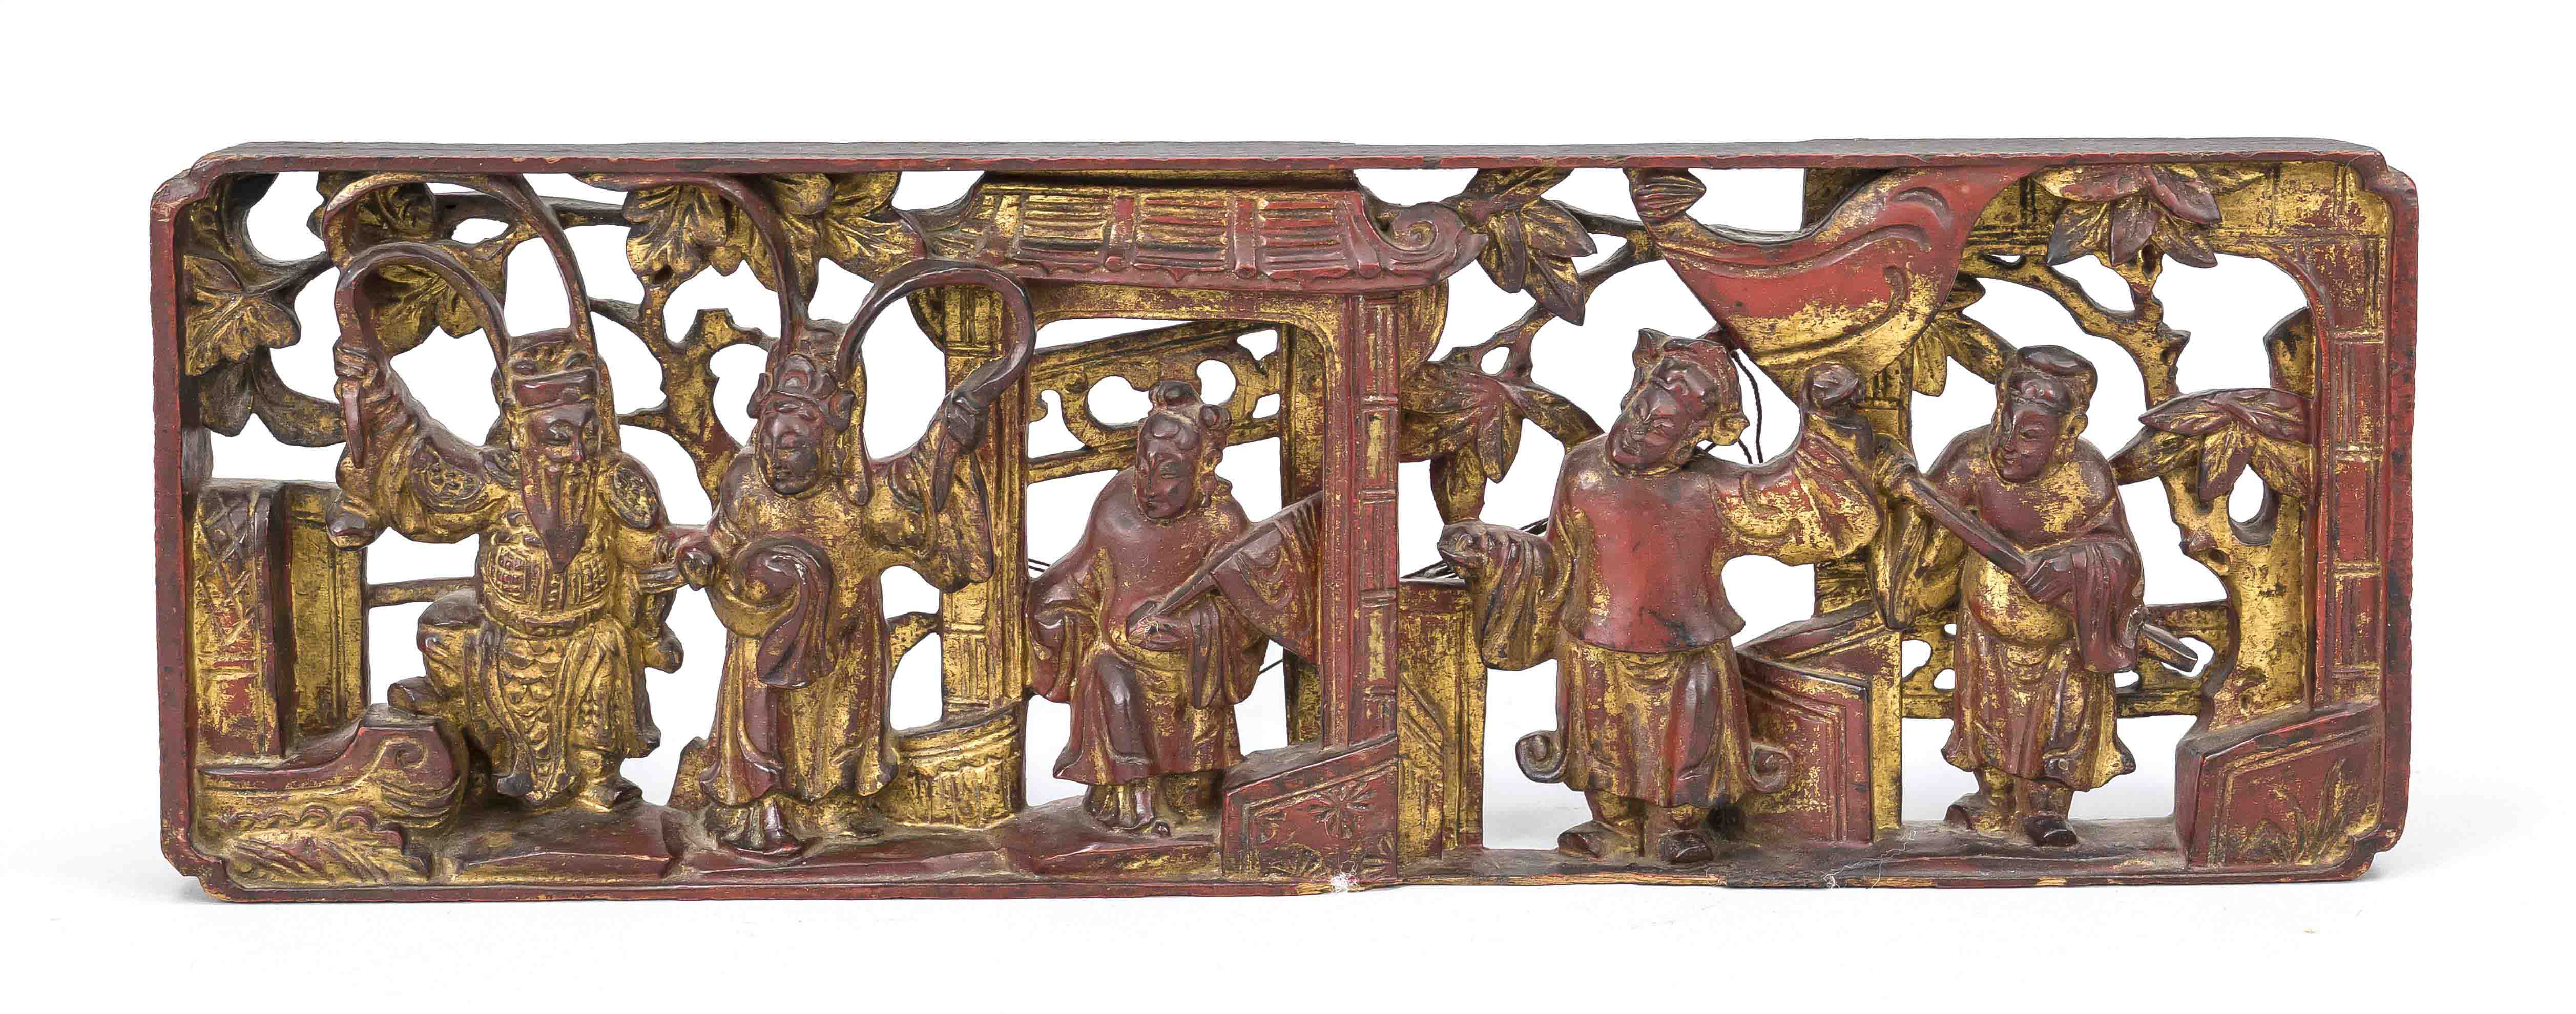 Carved panel, China 19th century (Qing). Open-worked wood carving with red lacquer and gold,